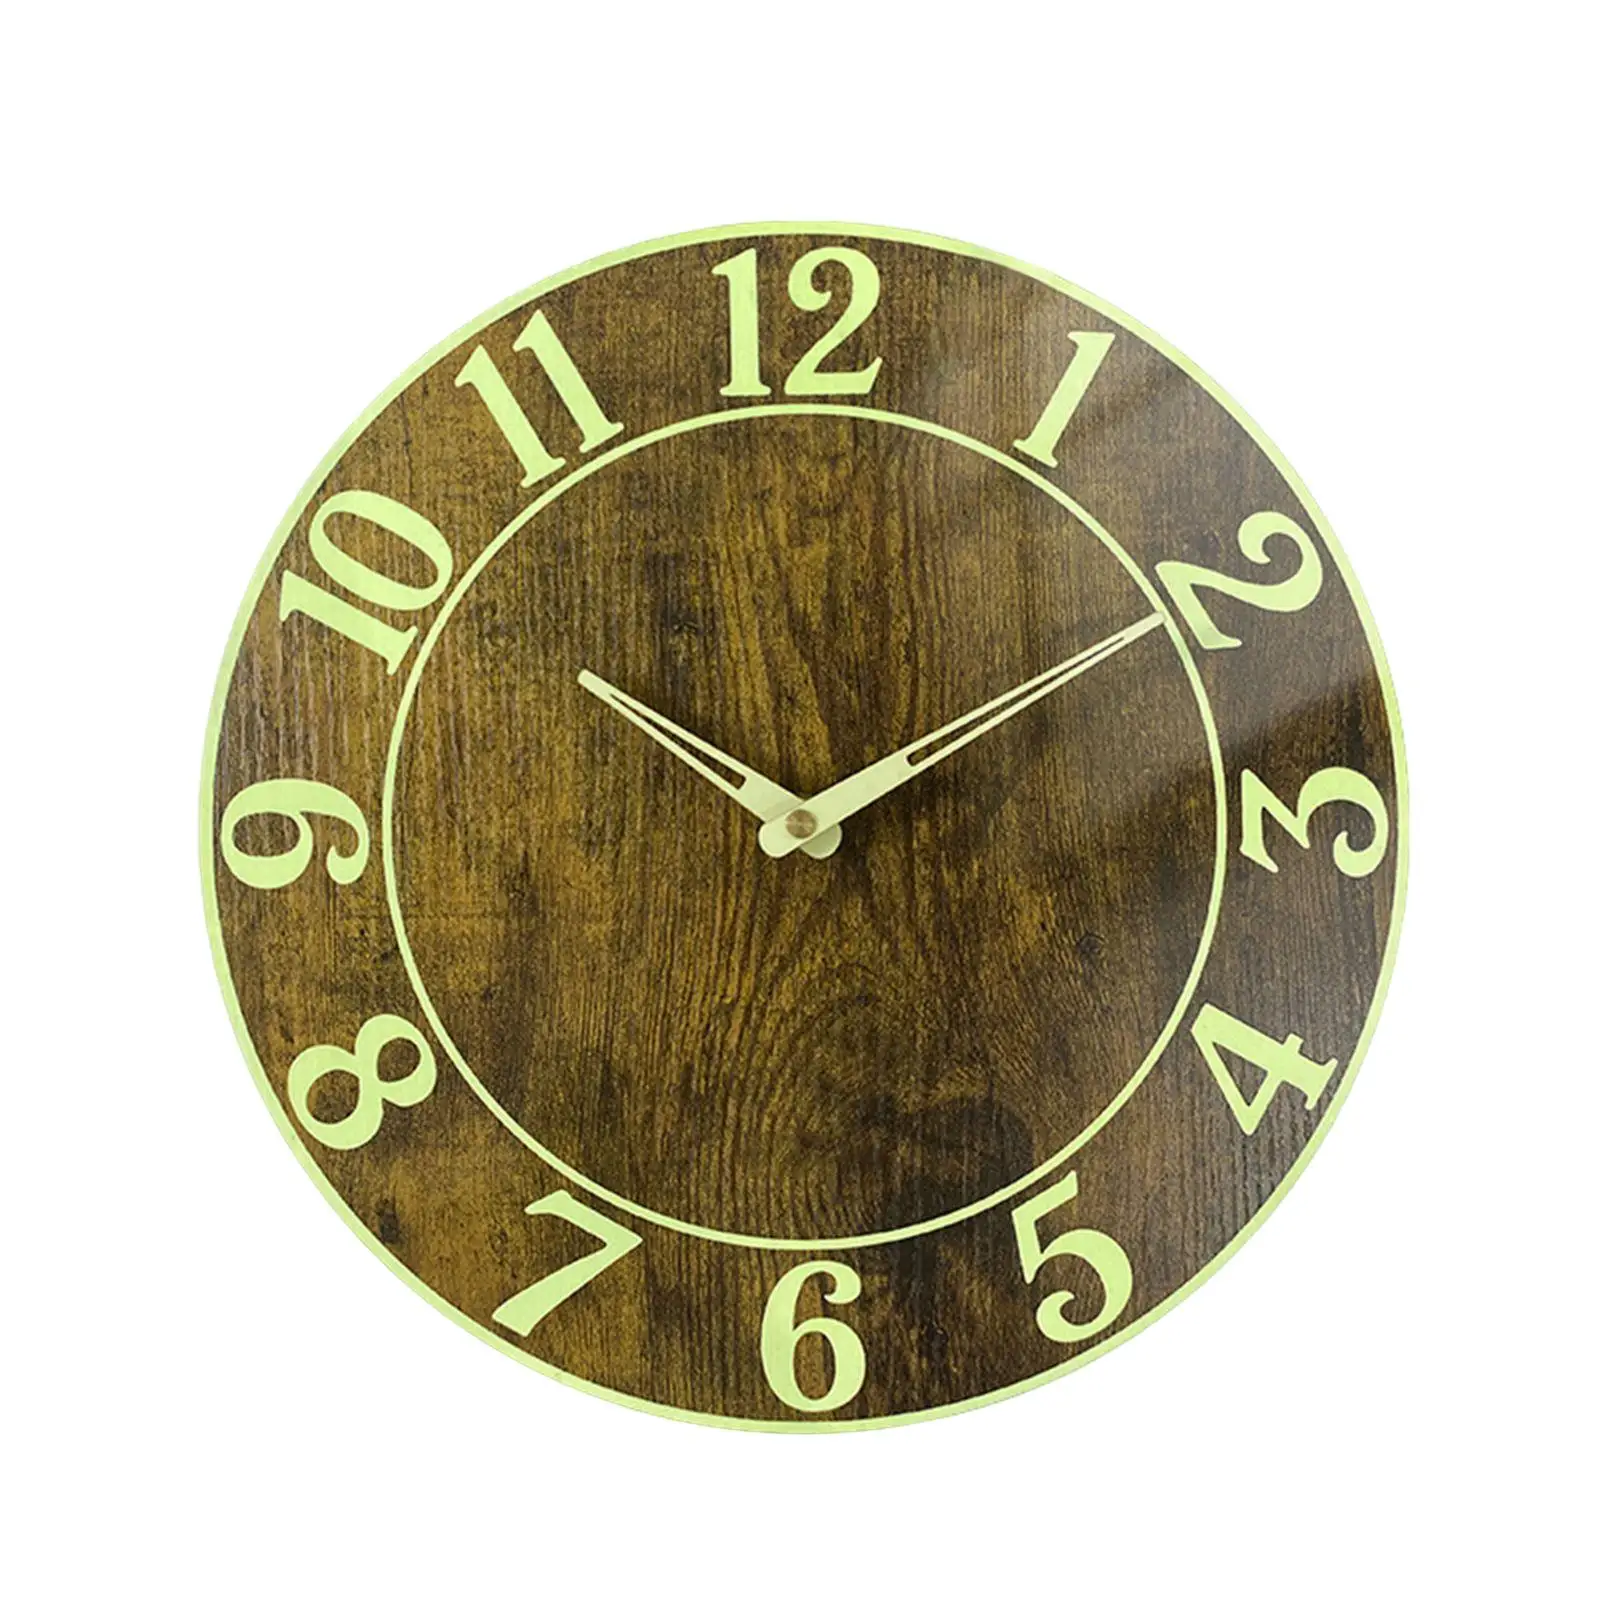 Luminous Wall Clock Non Ticking Round Night Lights Decorative Creative Wooden Clock for Hotel Bedroom Living Room Gift Kitchen